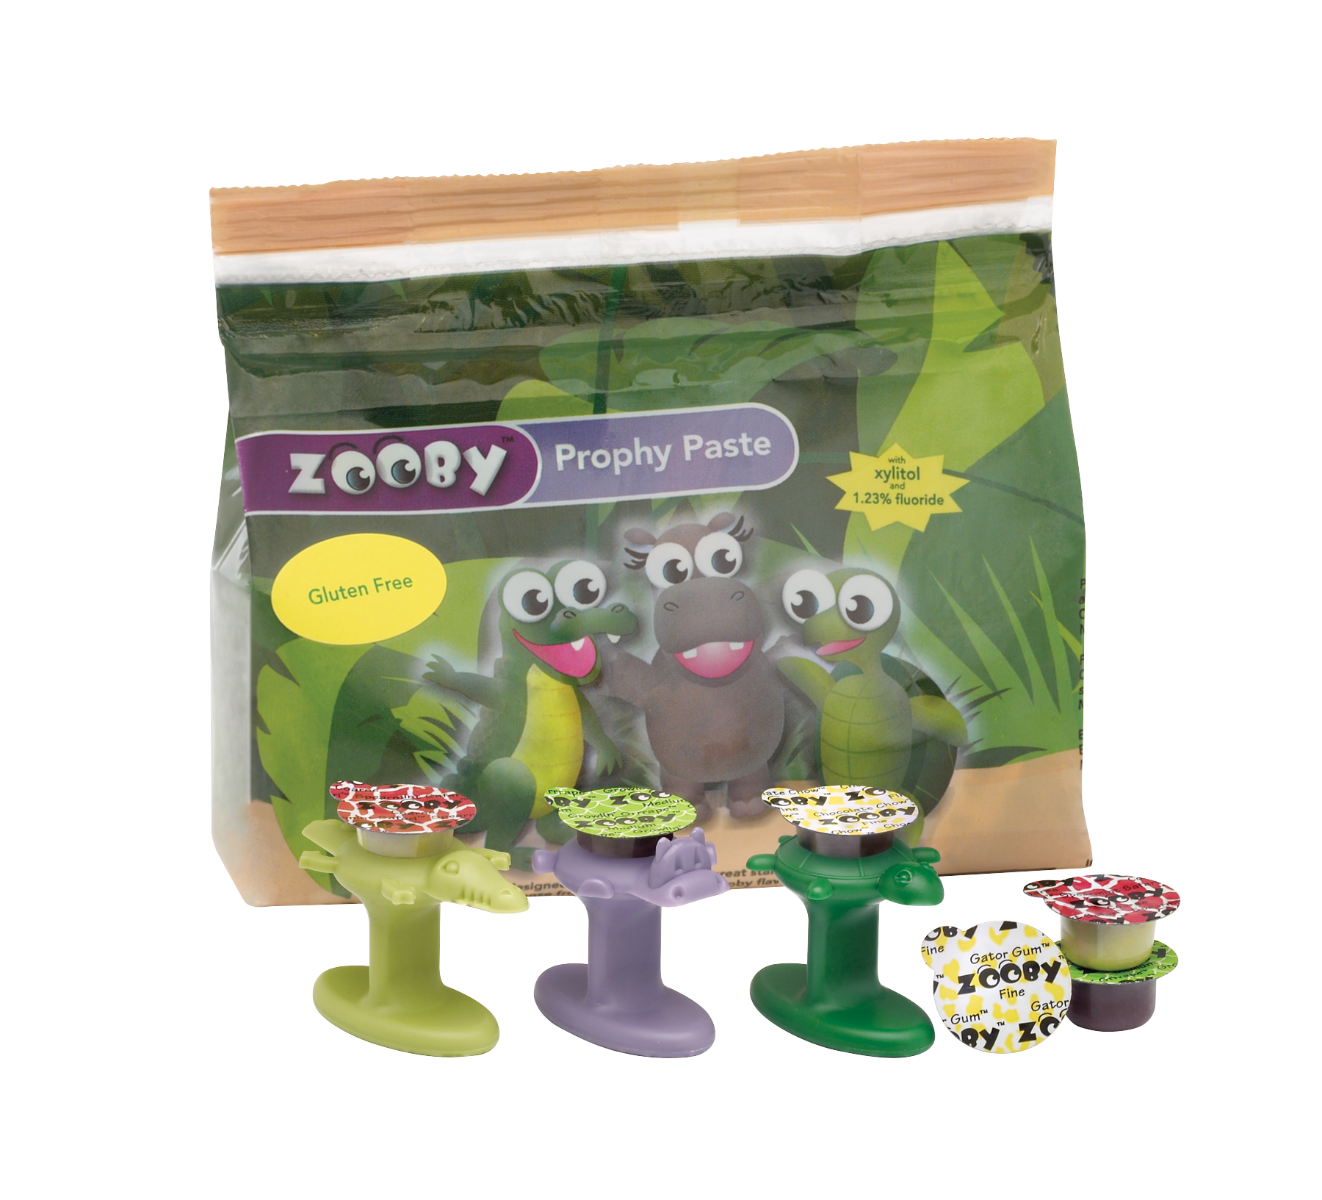 Zooby Prophy Paste (Happy Hippo Cake)